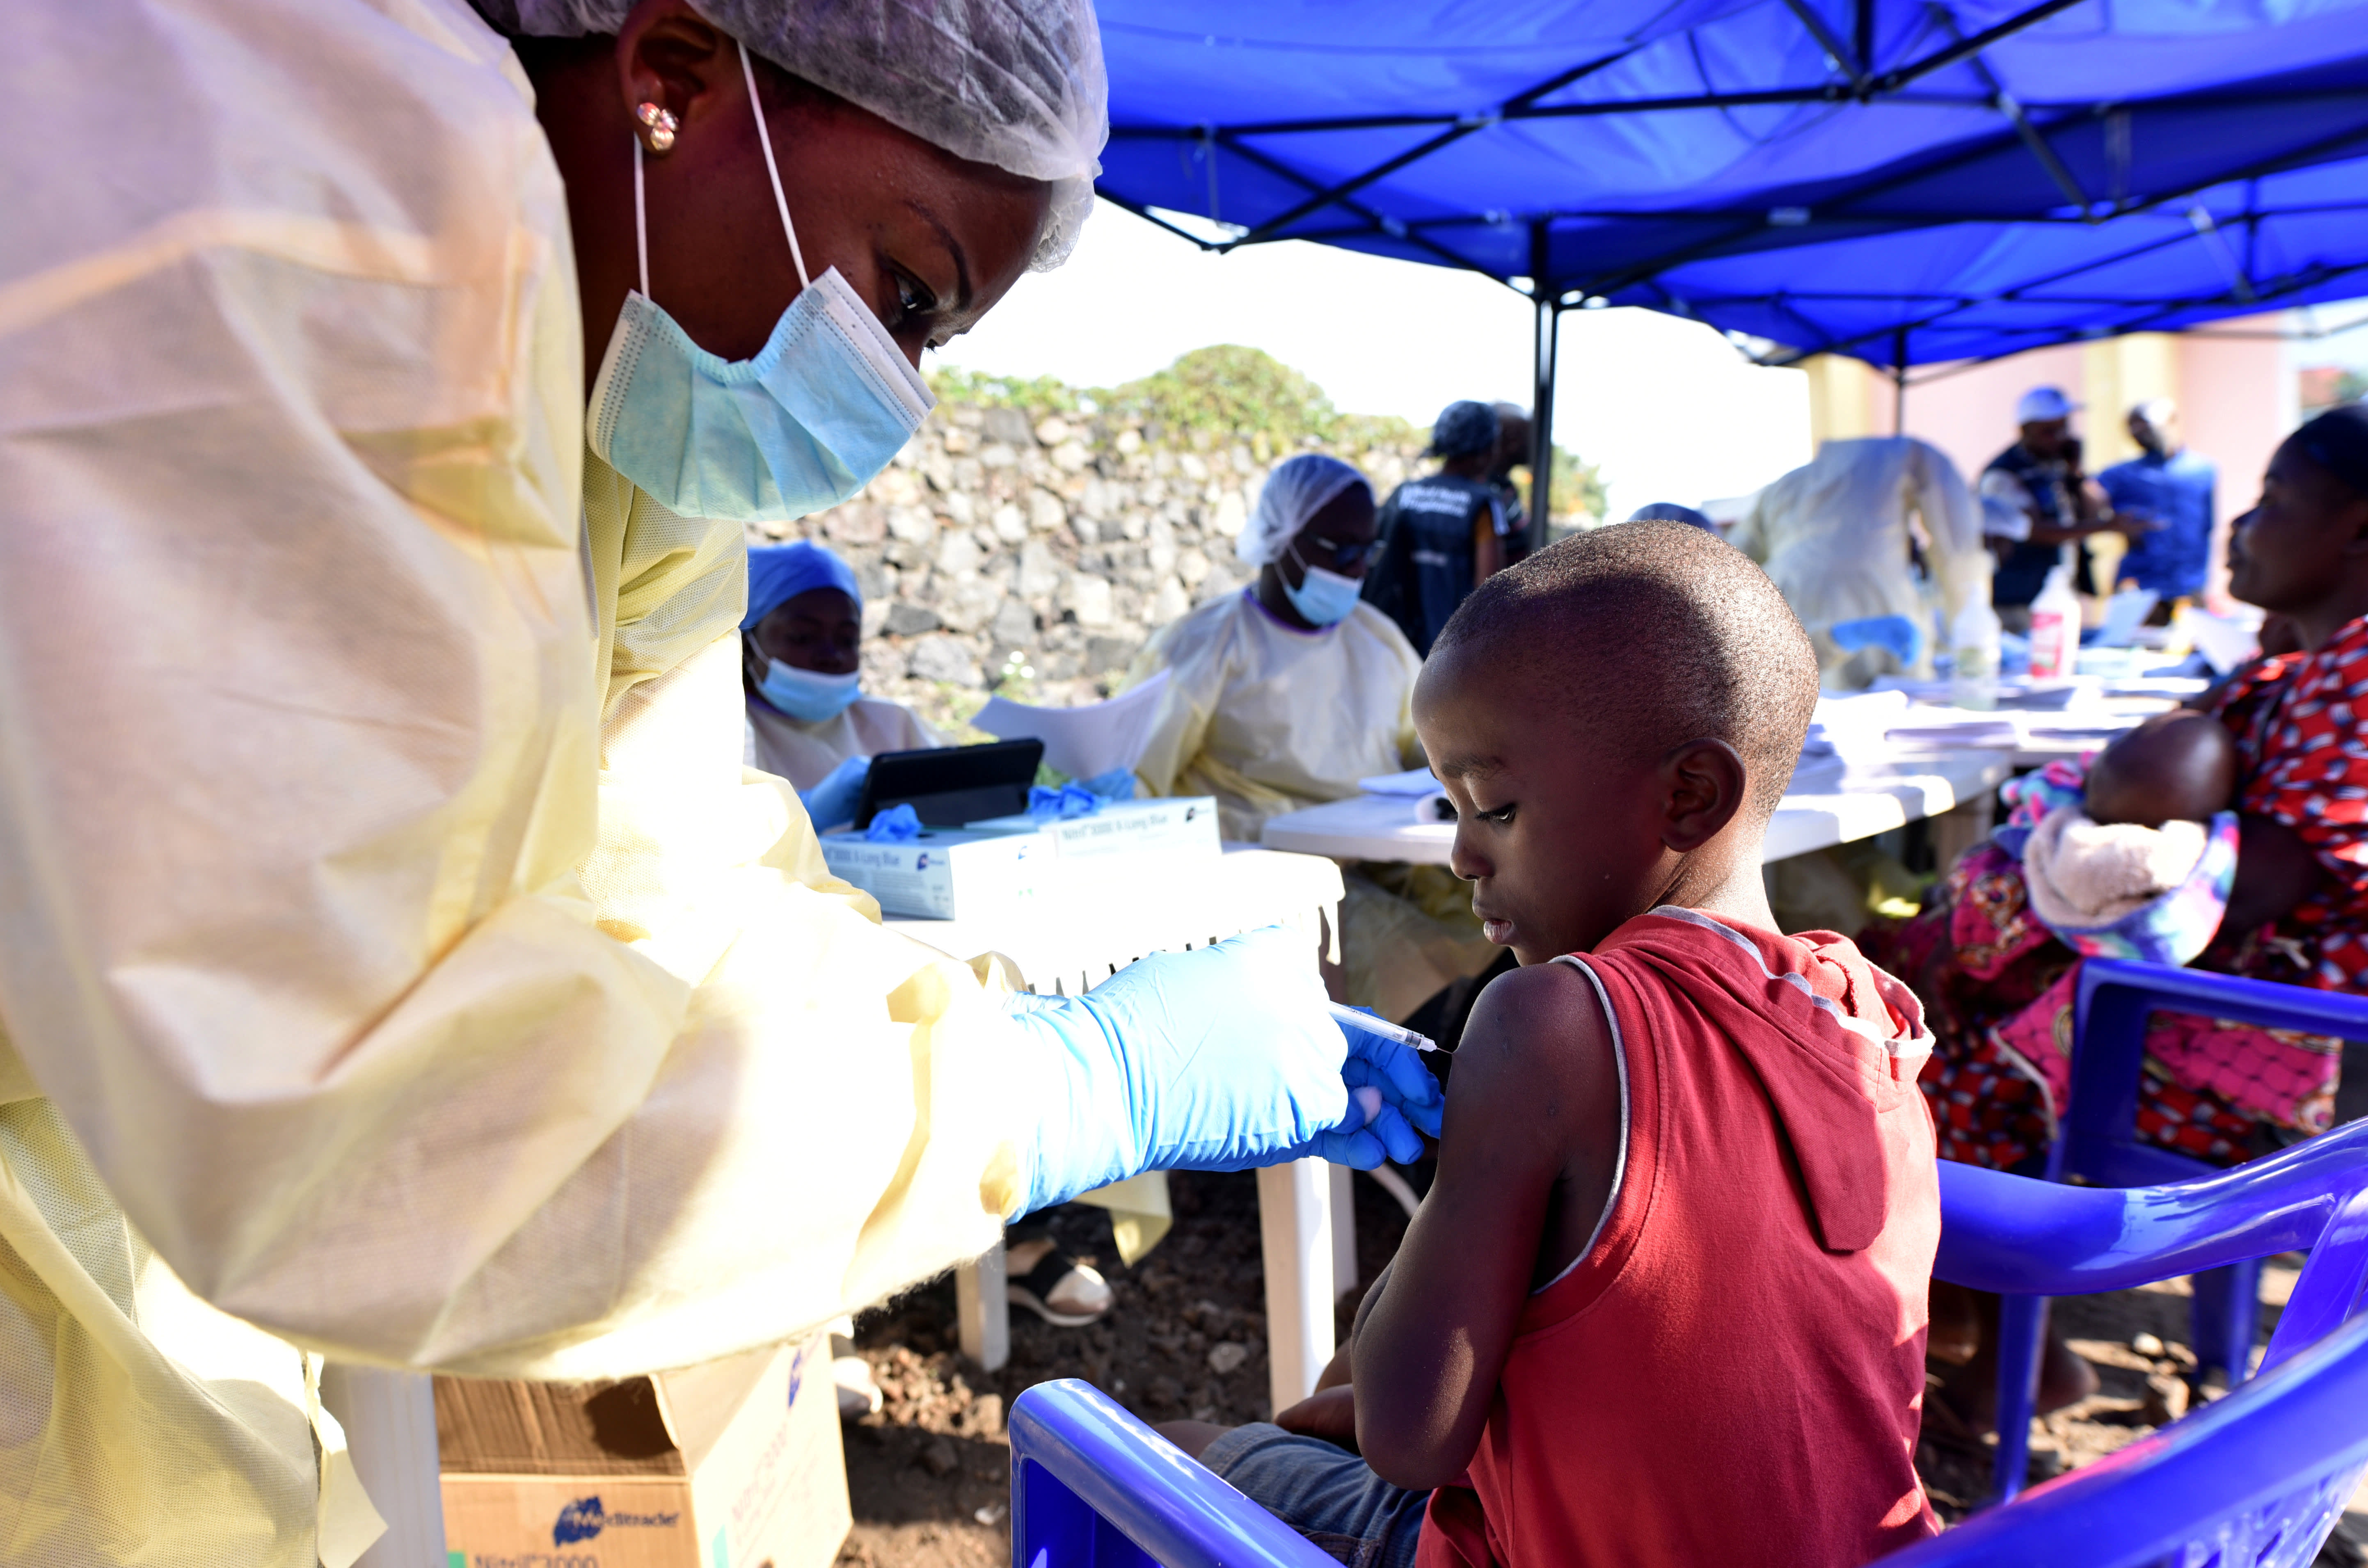 White House says Ebola outbreaks in Africa need quick action to avoid ‘catastrophic consequences’